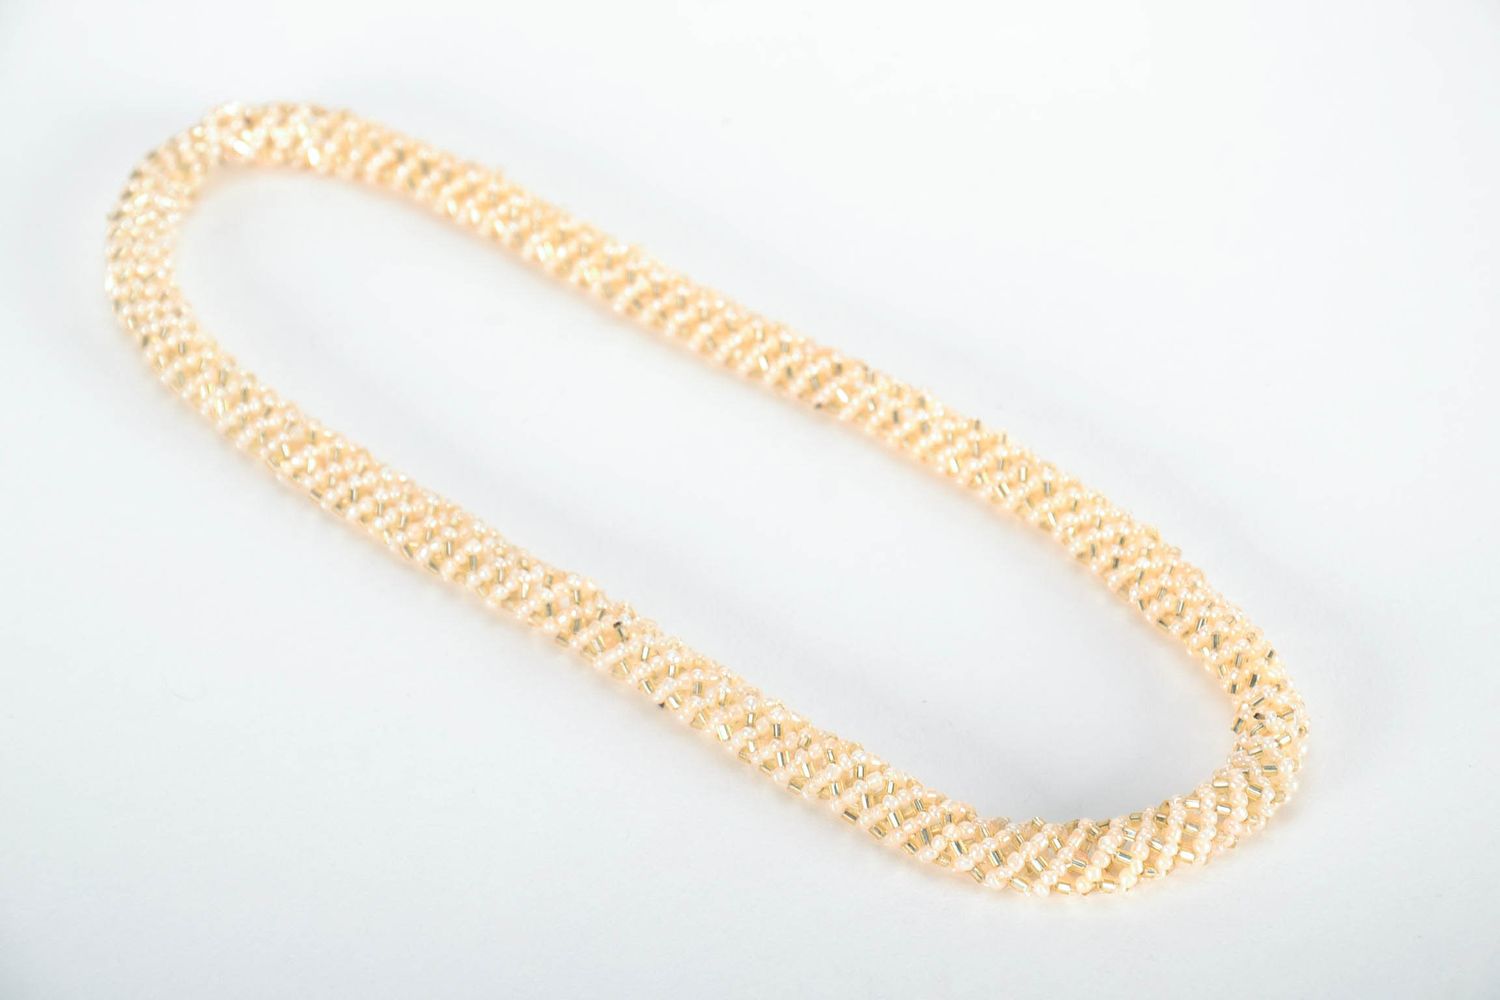 Jute necklace made of beads photo 4